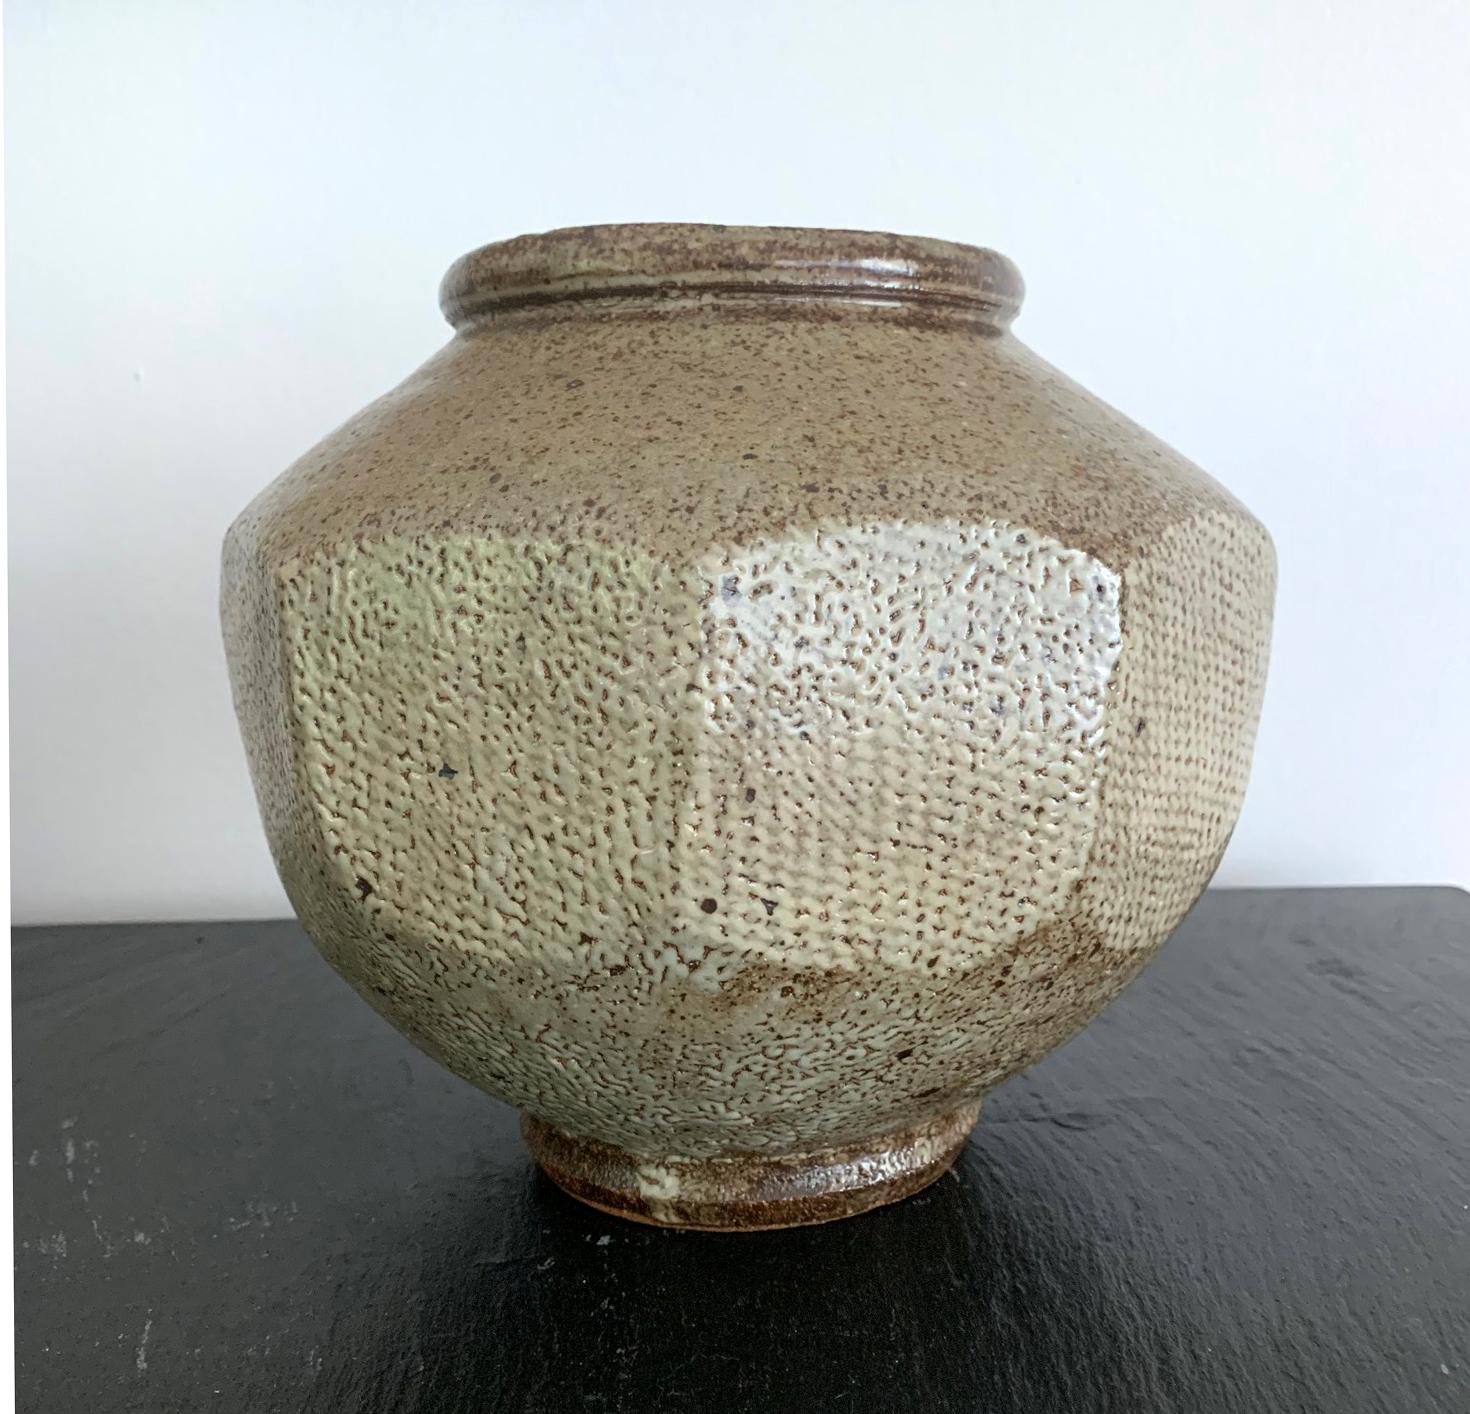 A handsome Japanese ceramic stoneware storage jar attributed to Tatsuzo Shimaoka (1919-2007), an important member in Japanese Mingei folk art movement. This piece of pottery is made in typical unique Jomon zogan style for which the artist was known